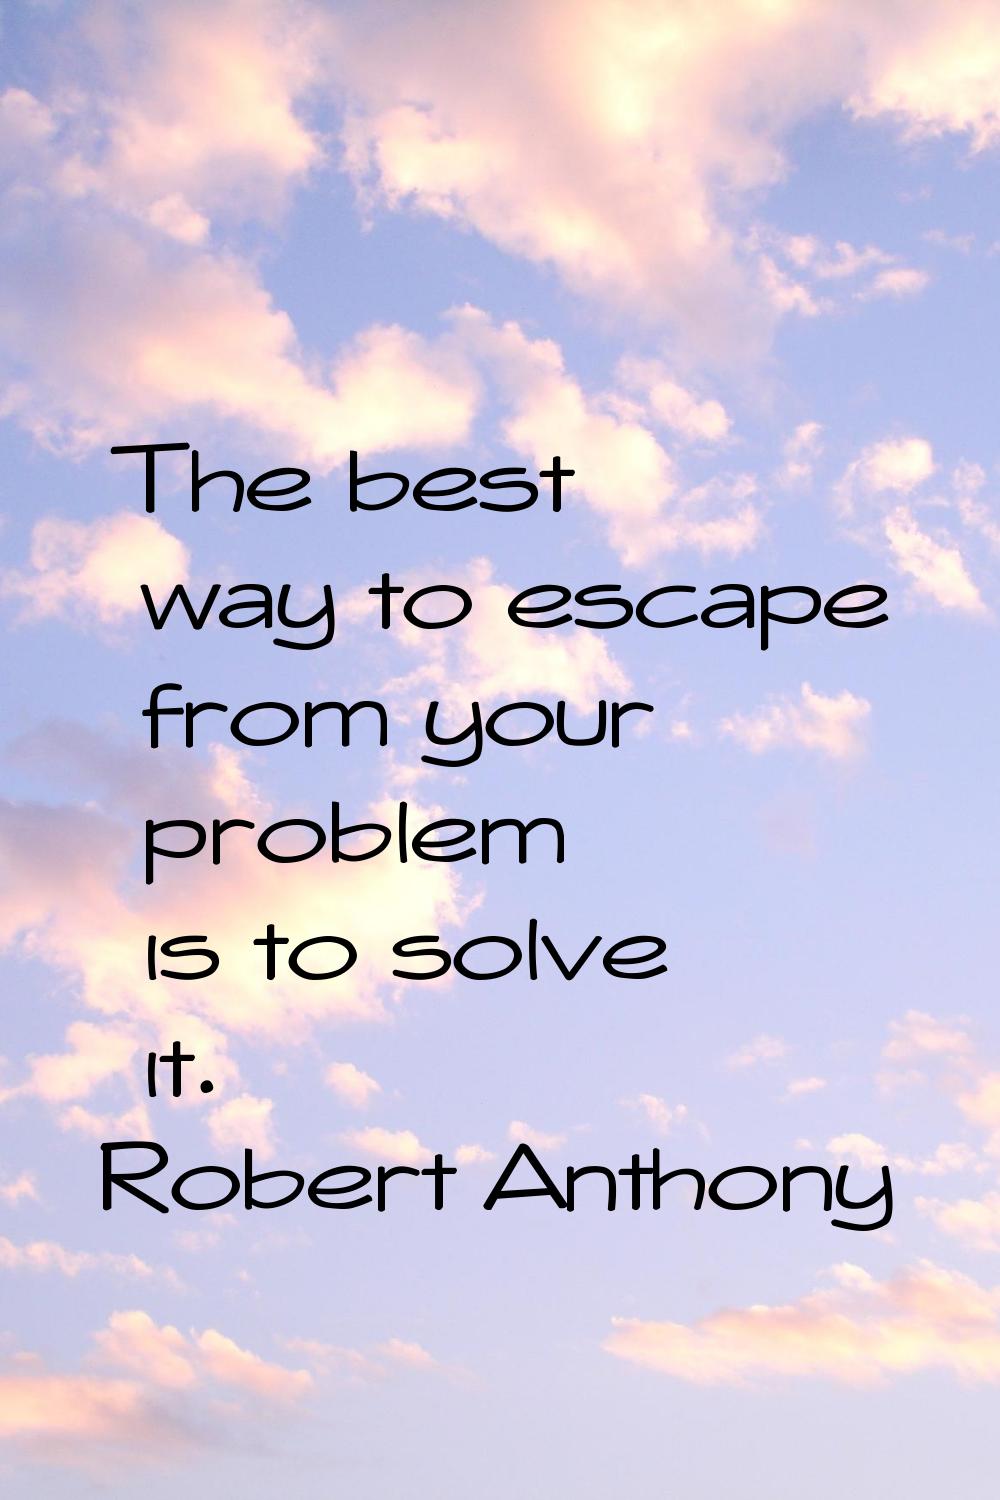 The best way to escape from your problem is to solve it.